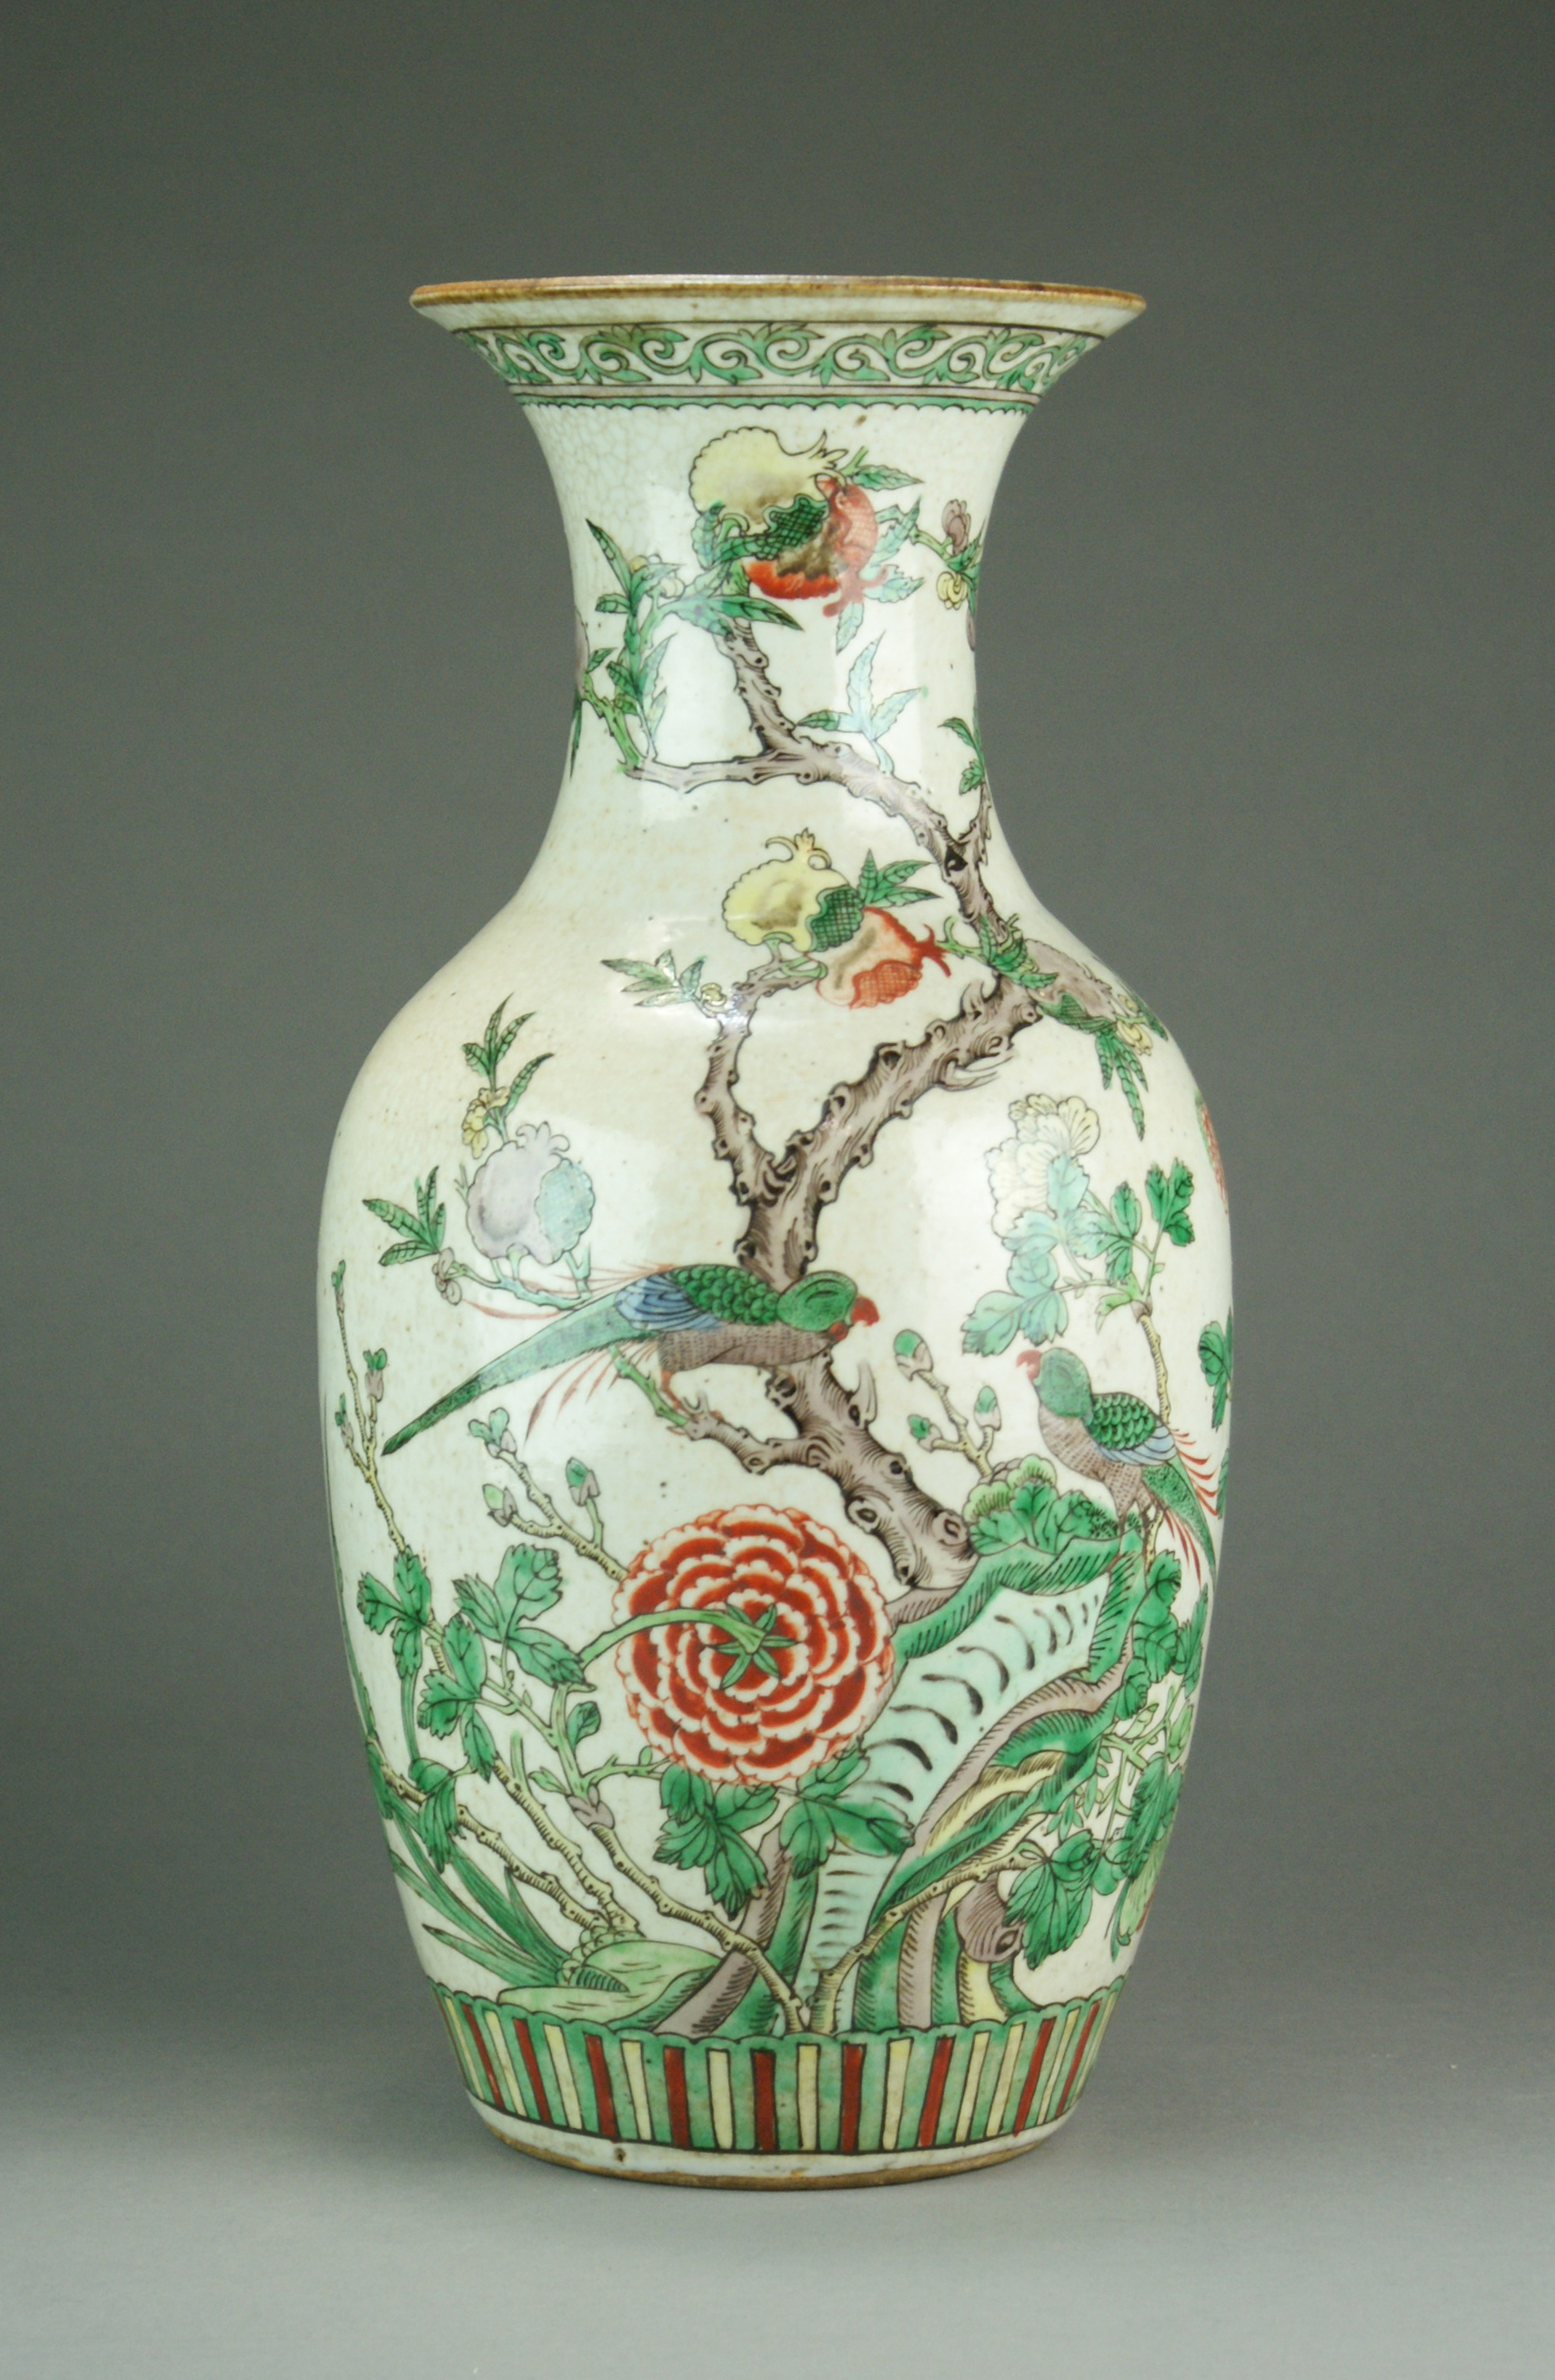 A Chinese soft paste famille verte style vase, late Qing/early Republic period,